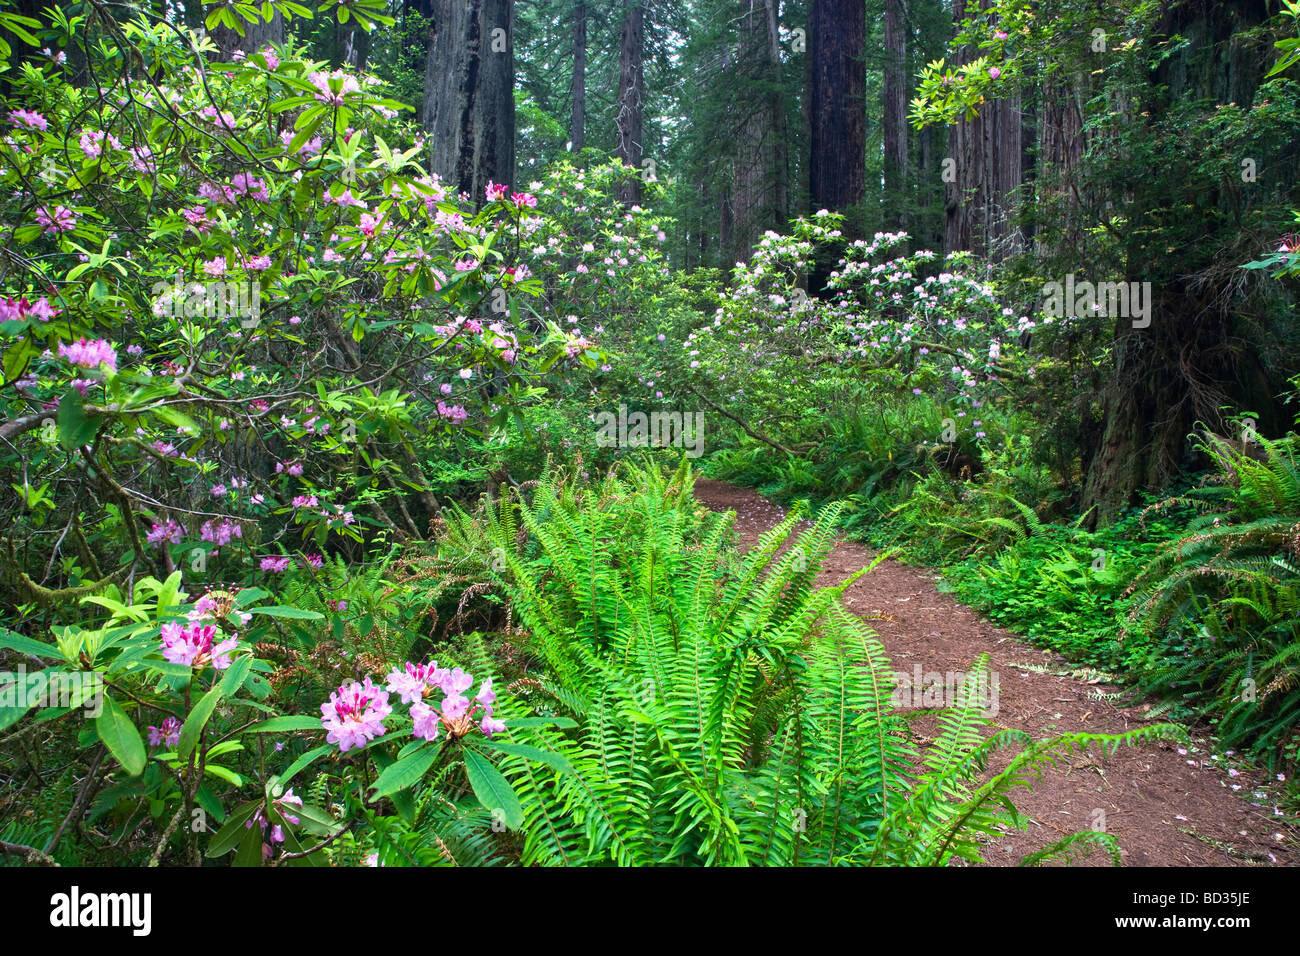 Rhododendrons flowering, Redwood Forest. Stock Photo